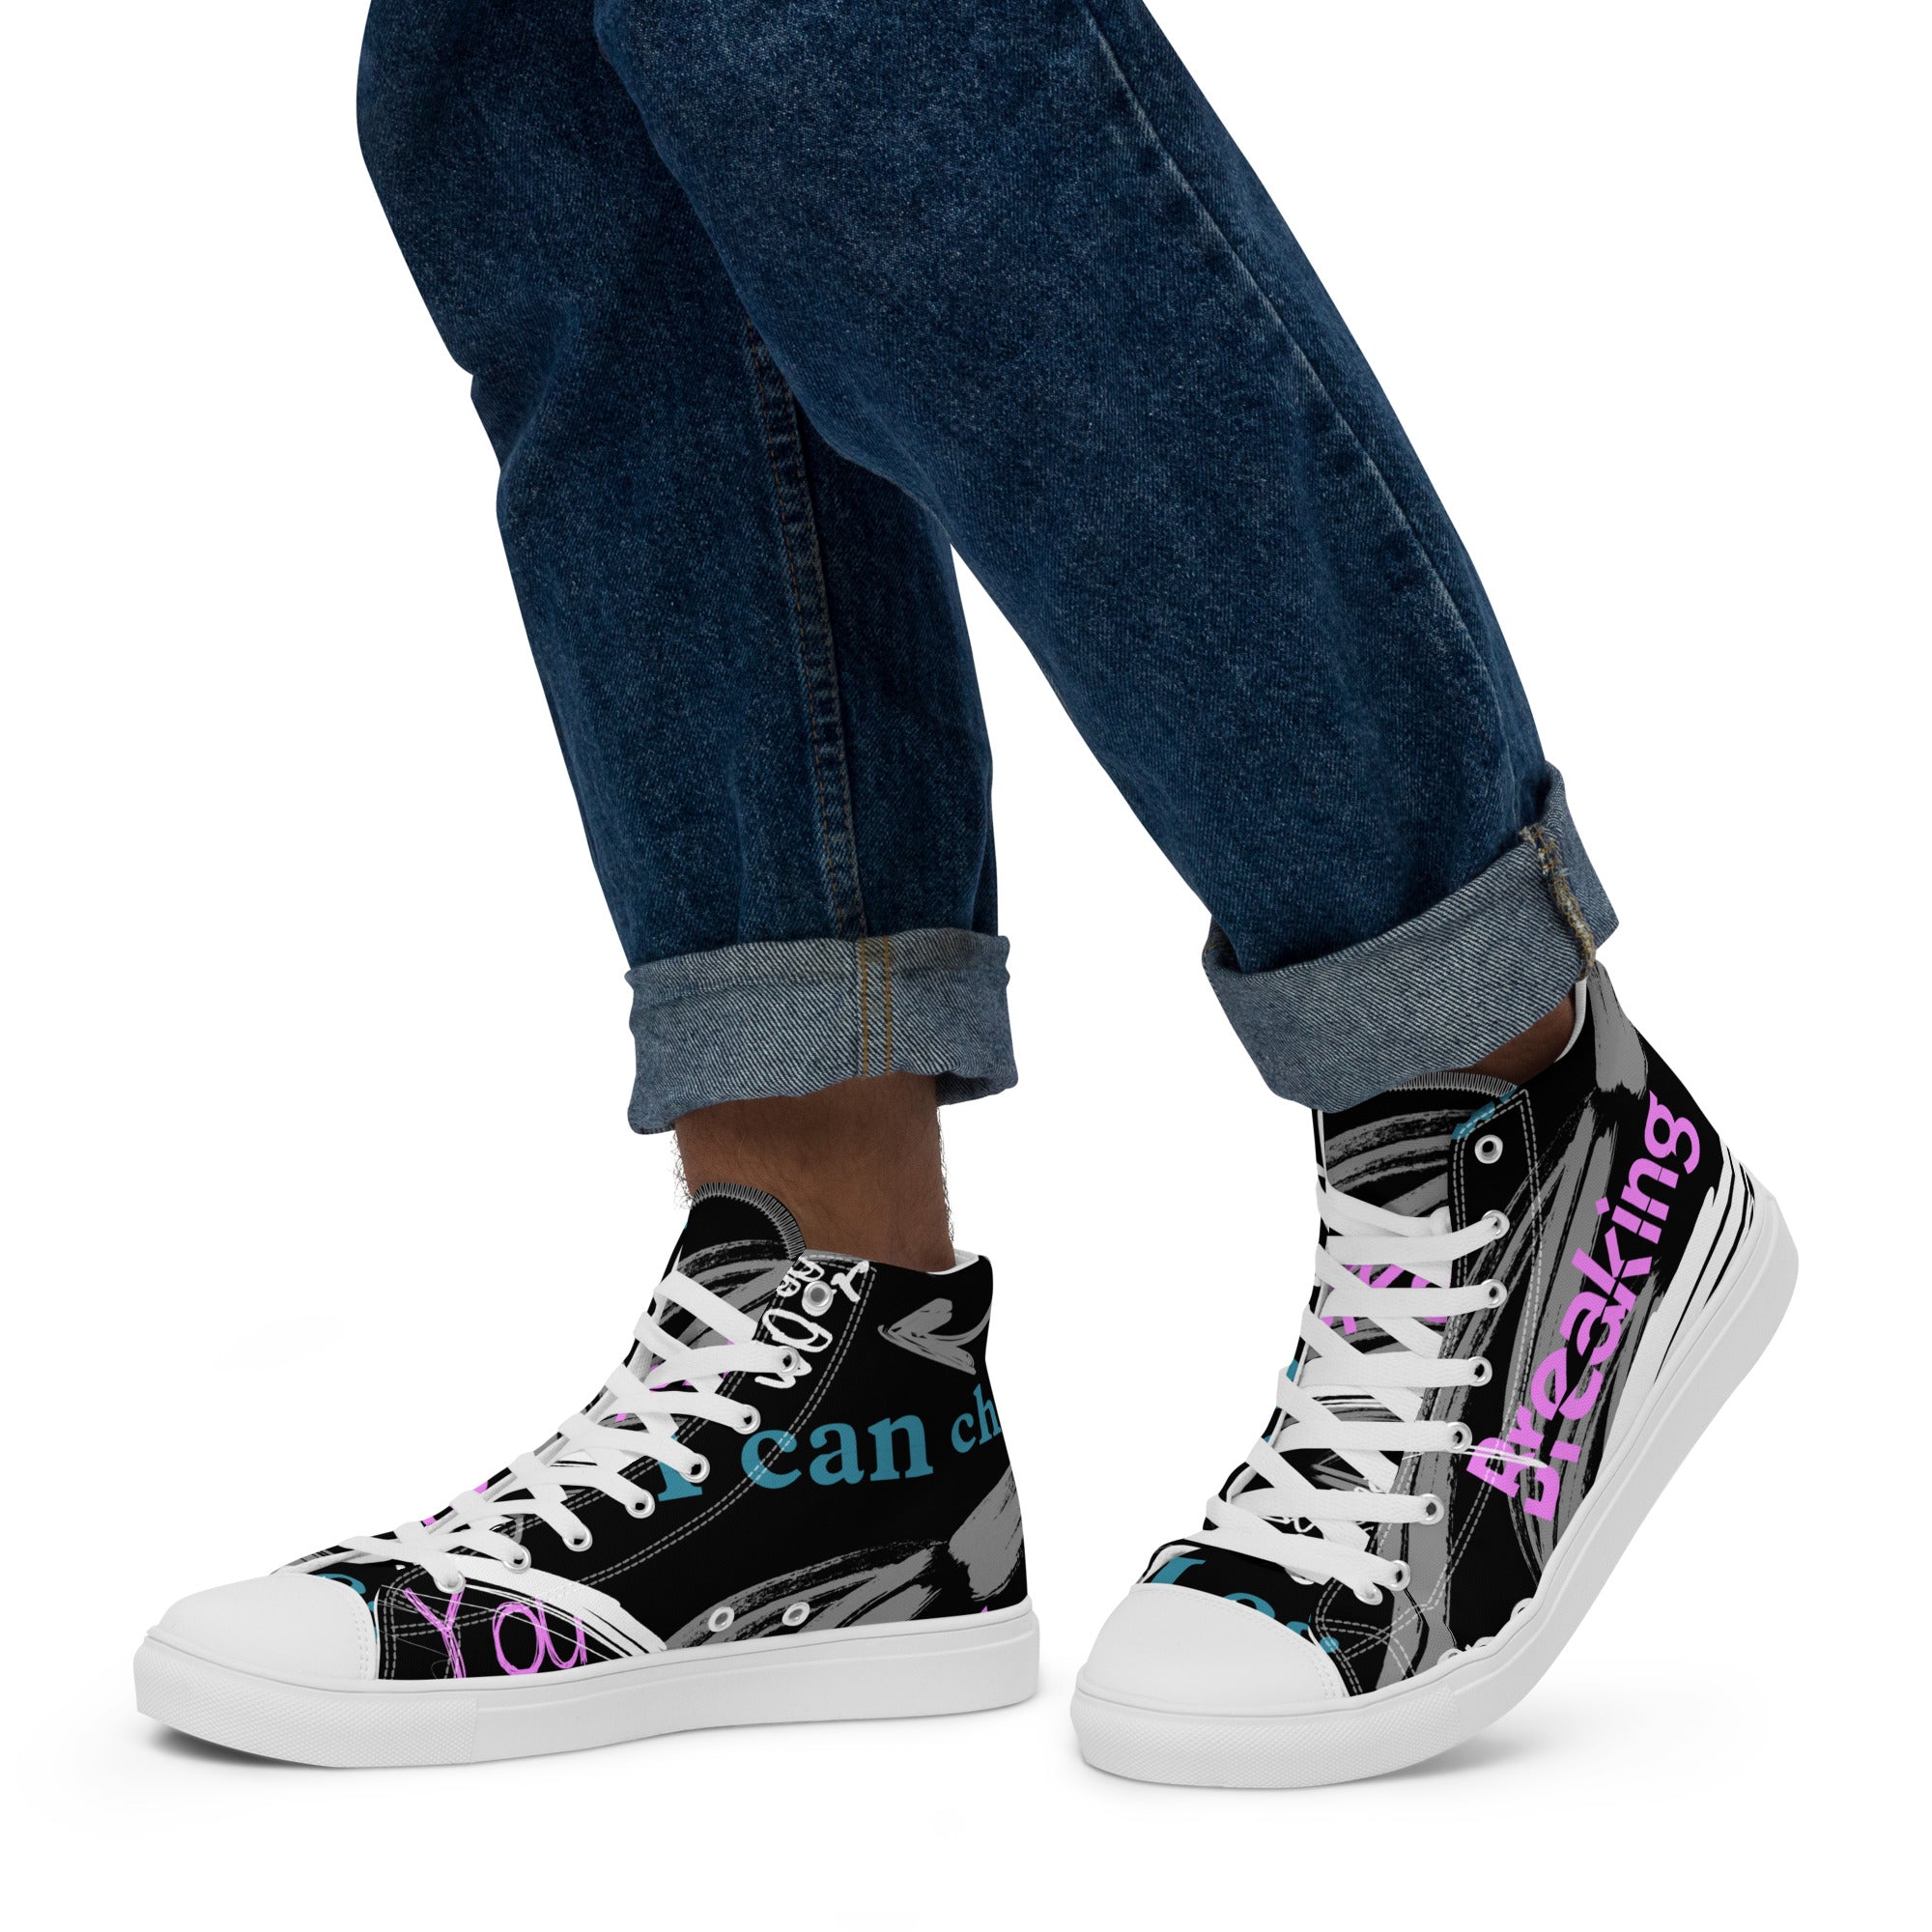 Typography Men's high top canvas shoes